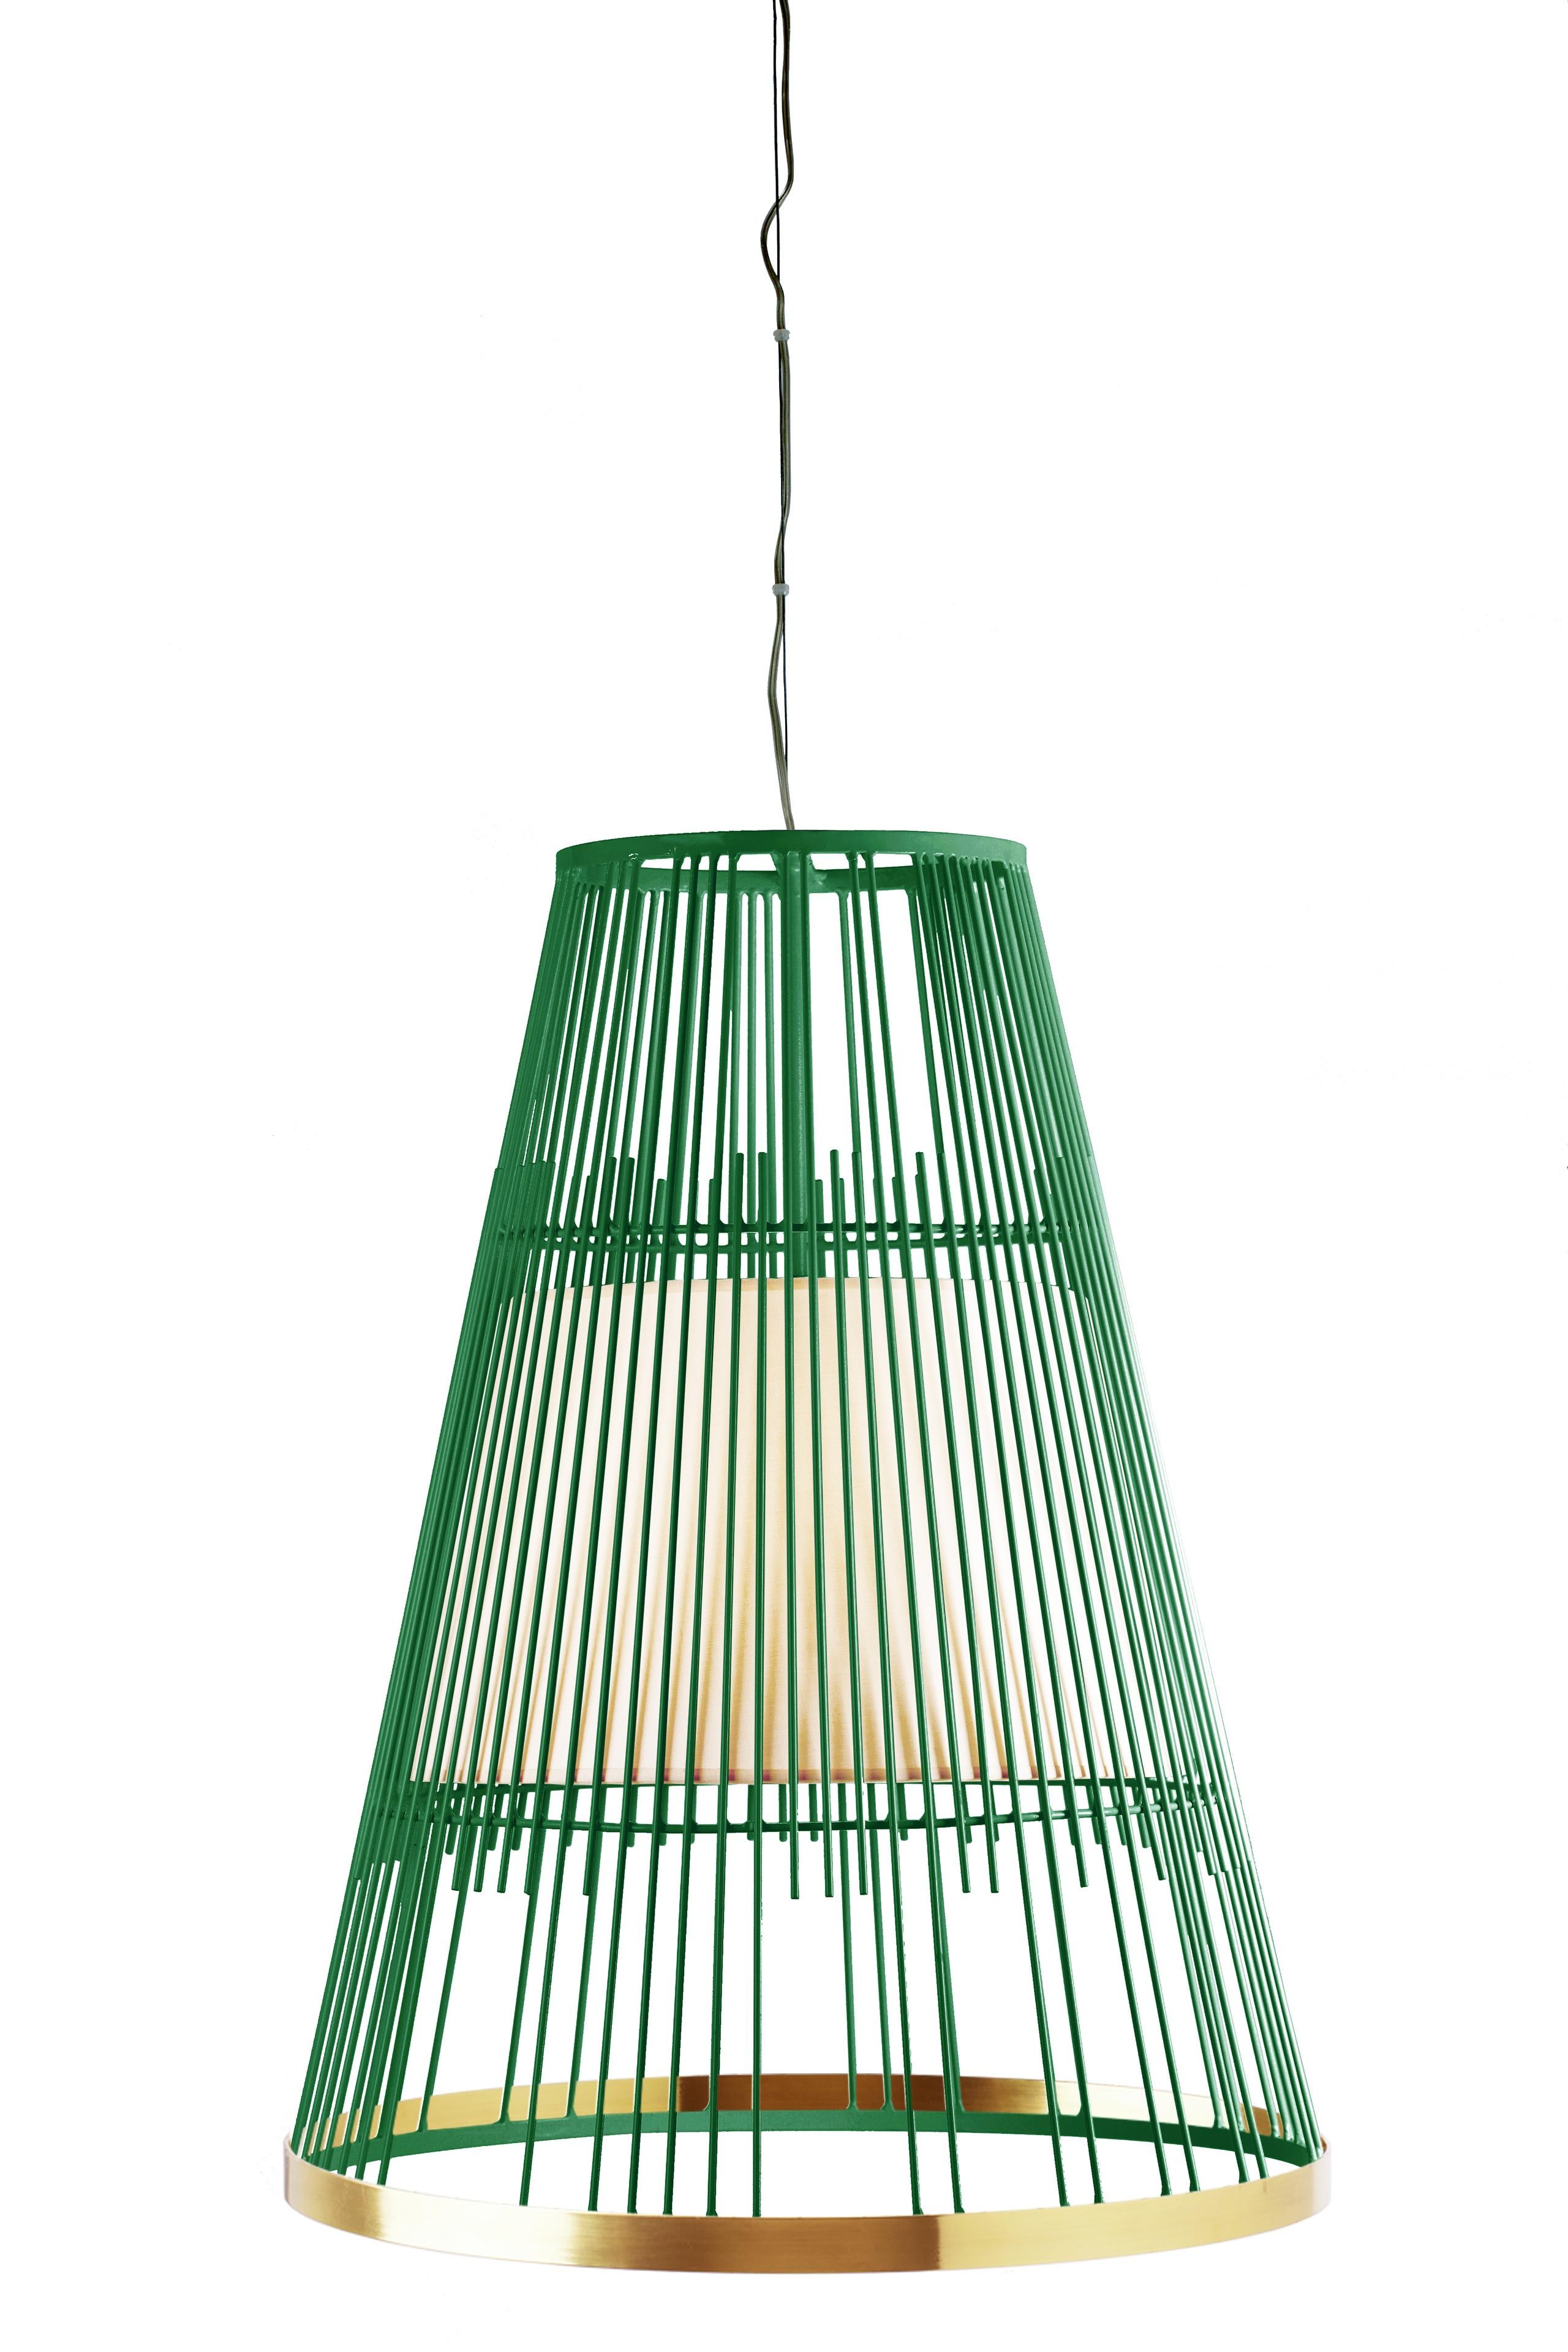 Contemporary Art Deco Inspired Up Pendant Lamp Dream Light Green and Brass For Sale 1